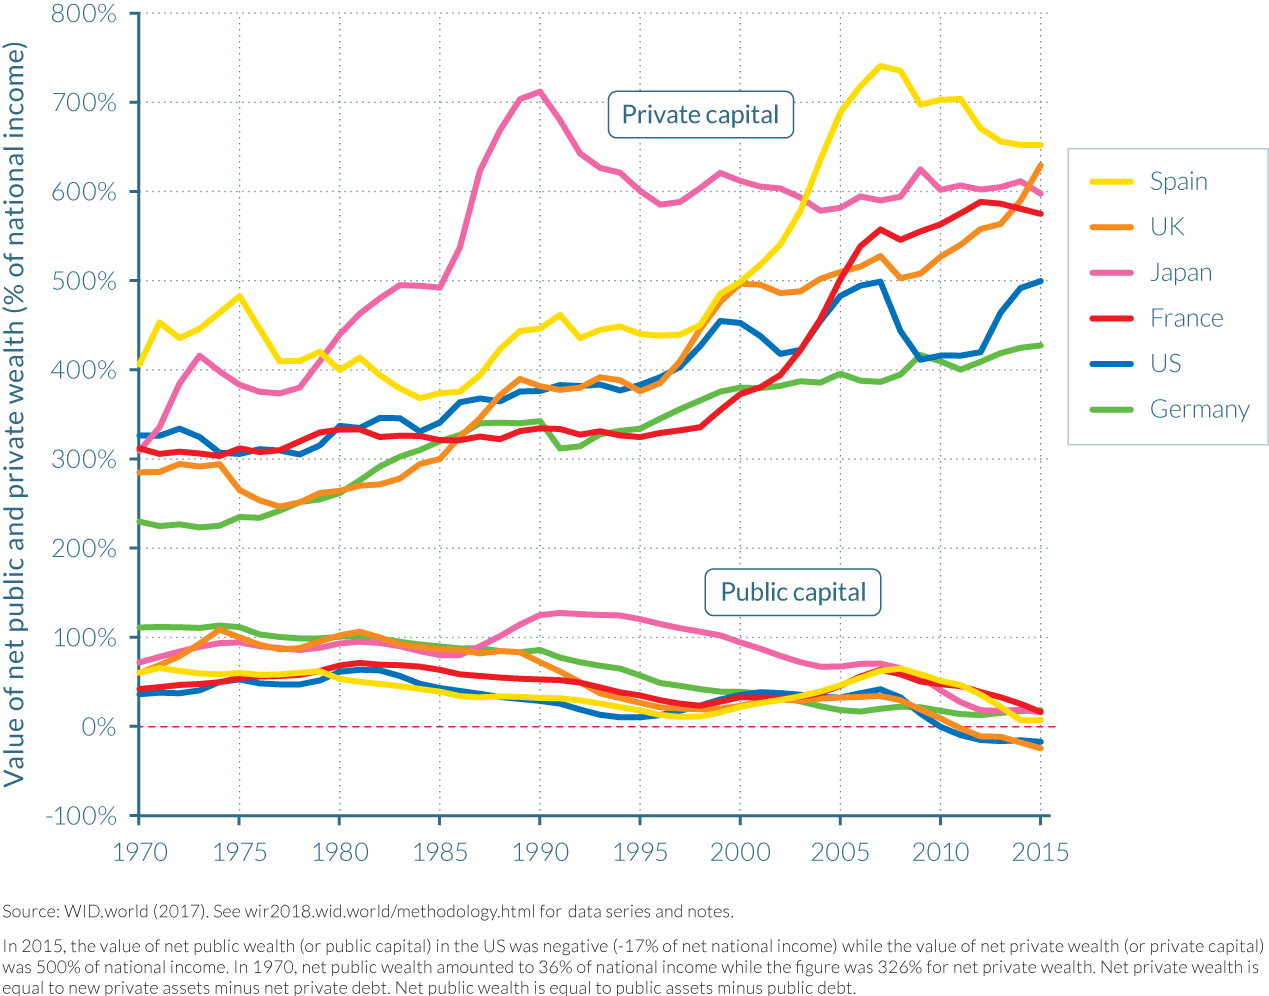 Figure 3.1.3 Net private wealth and net public wealth to national income ratios in rich countries, 1970–2015